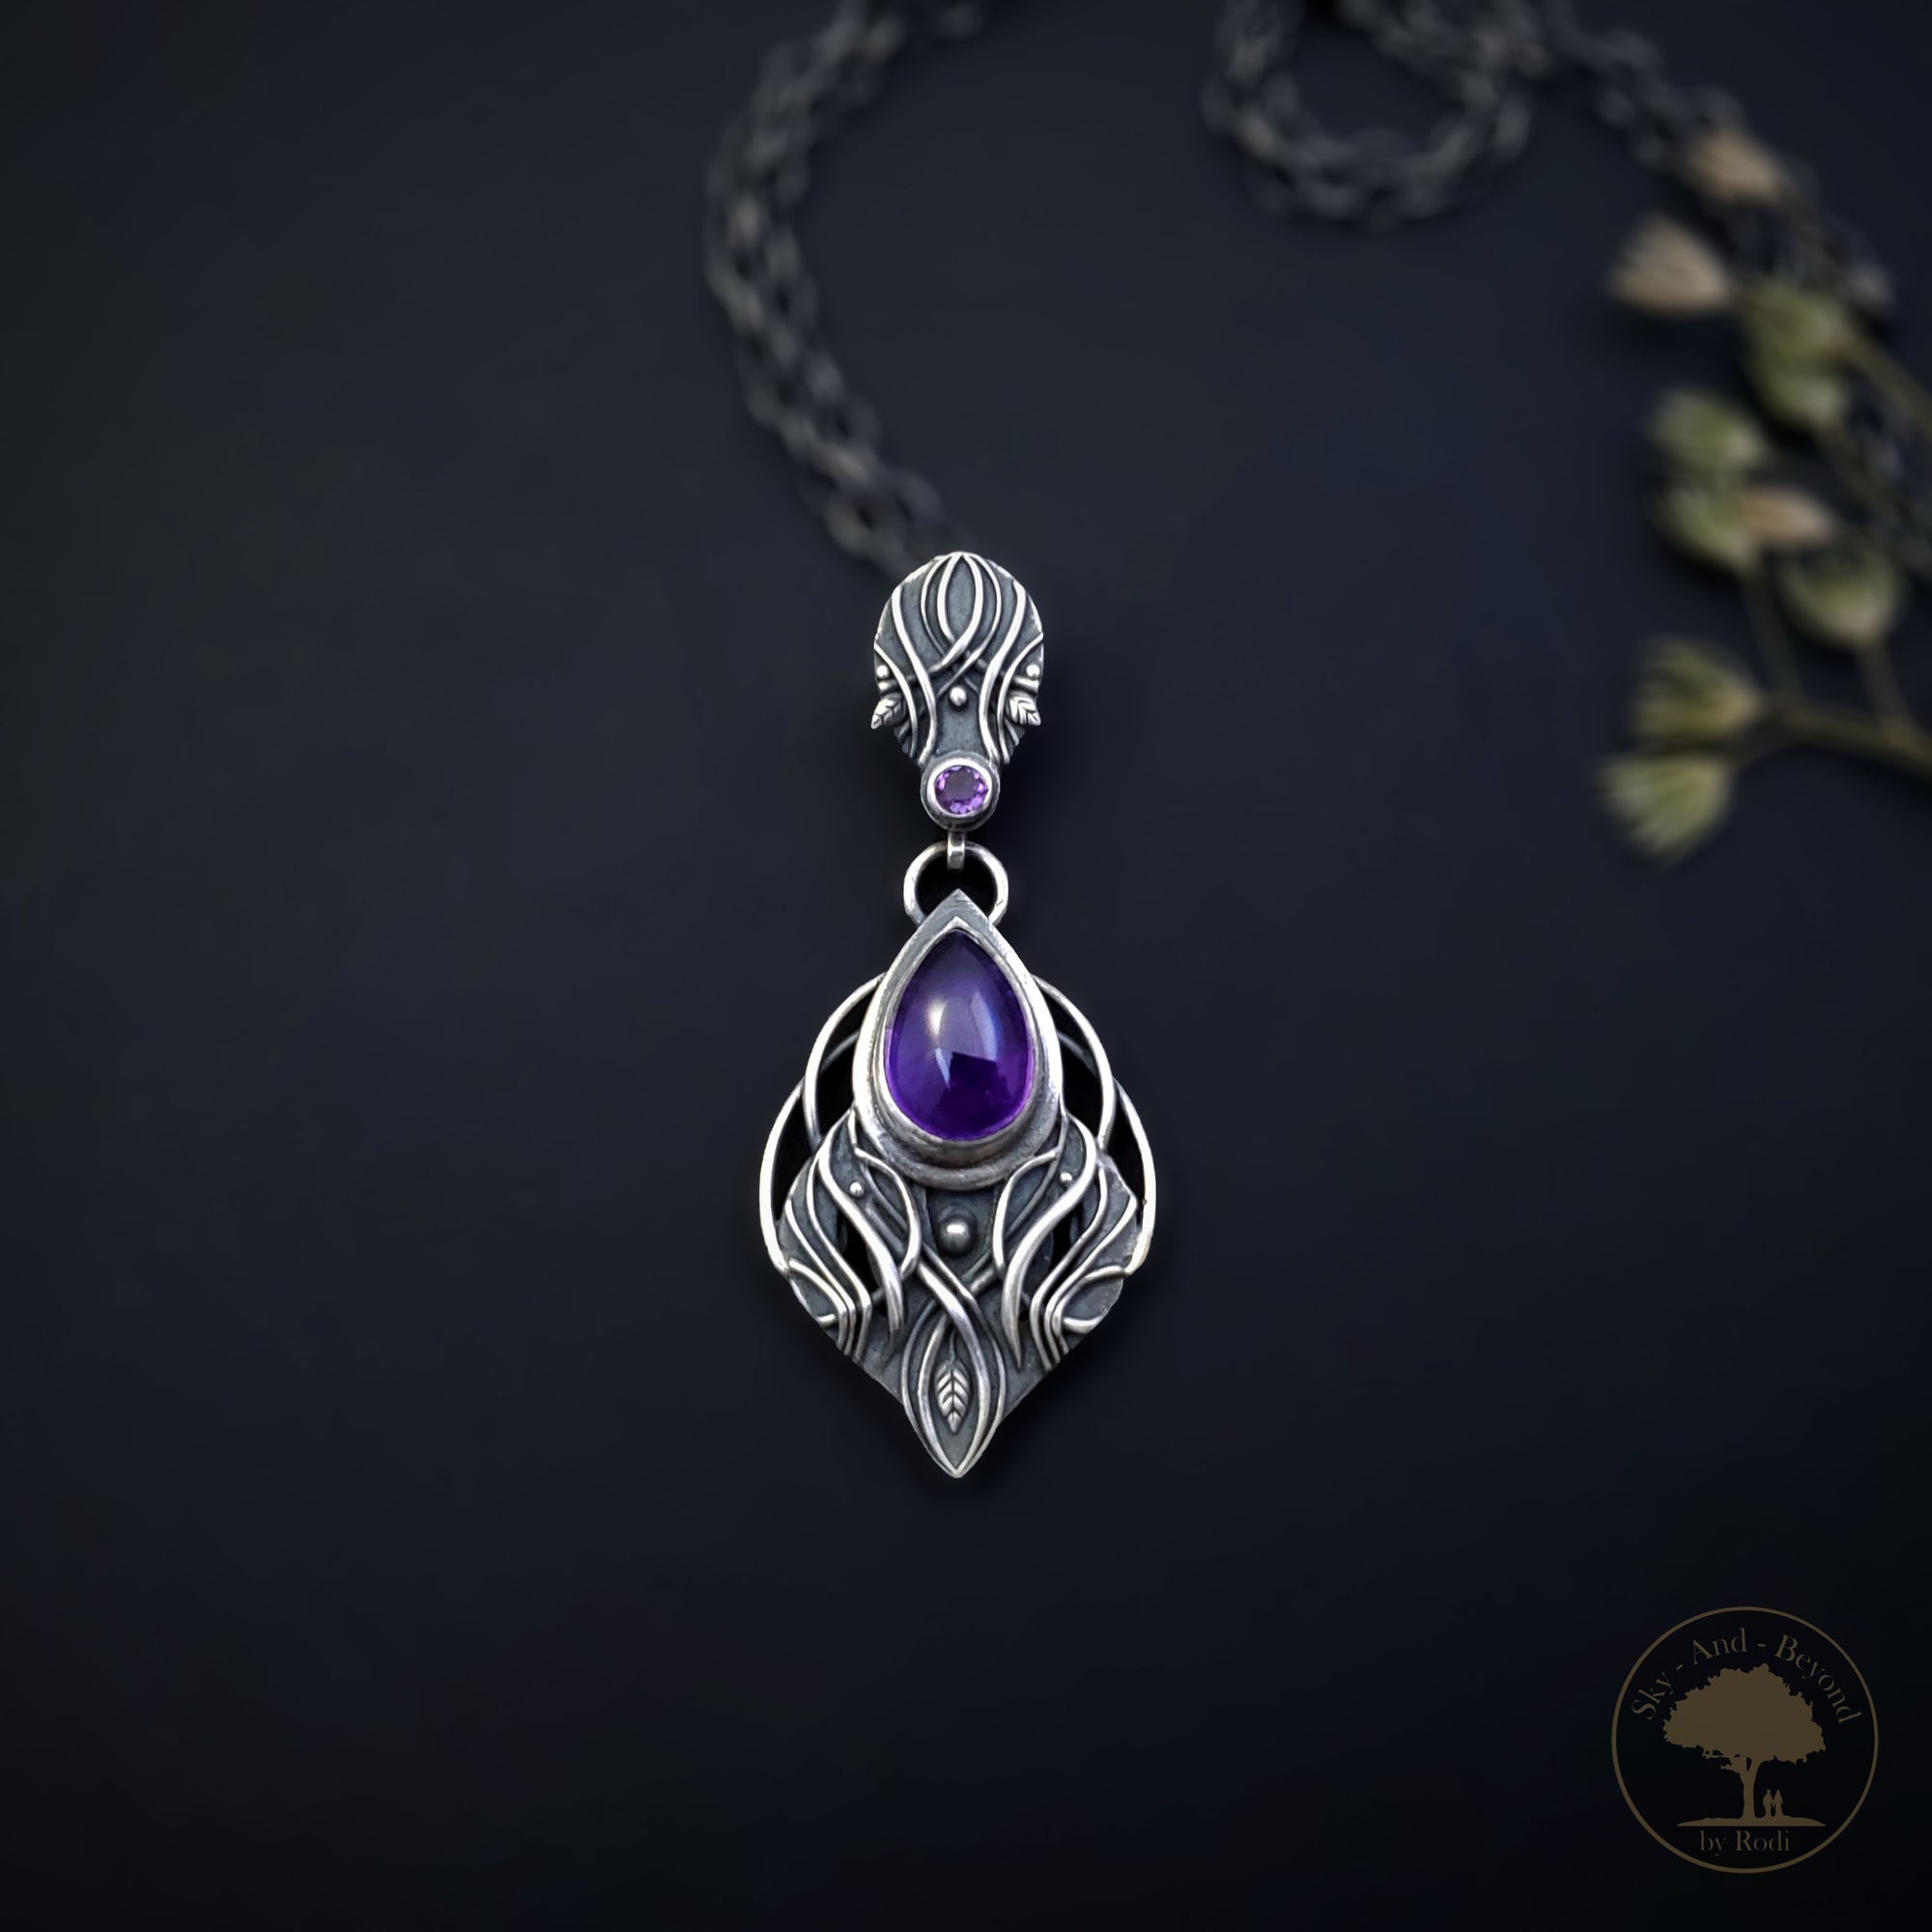 Sterling and Fine Silver with Amethyst, Fantasy Elvish Gothic Pendant and Necklace - Purple Guardian